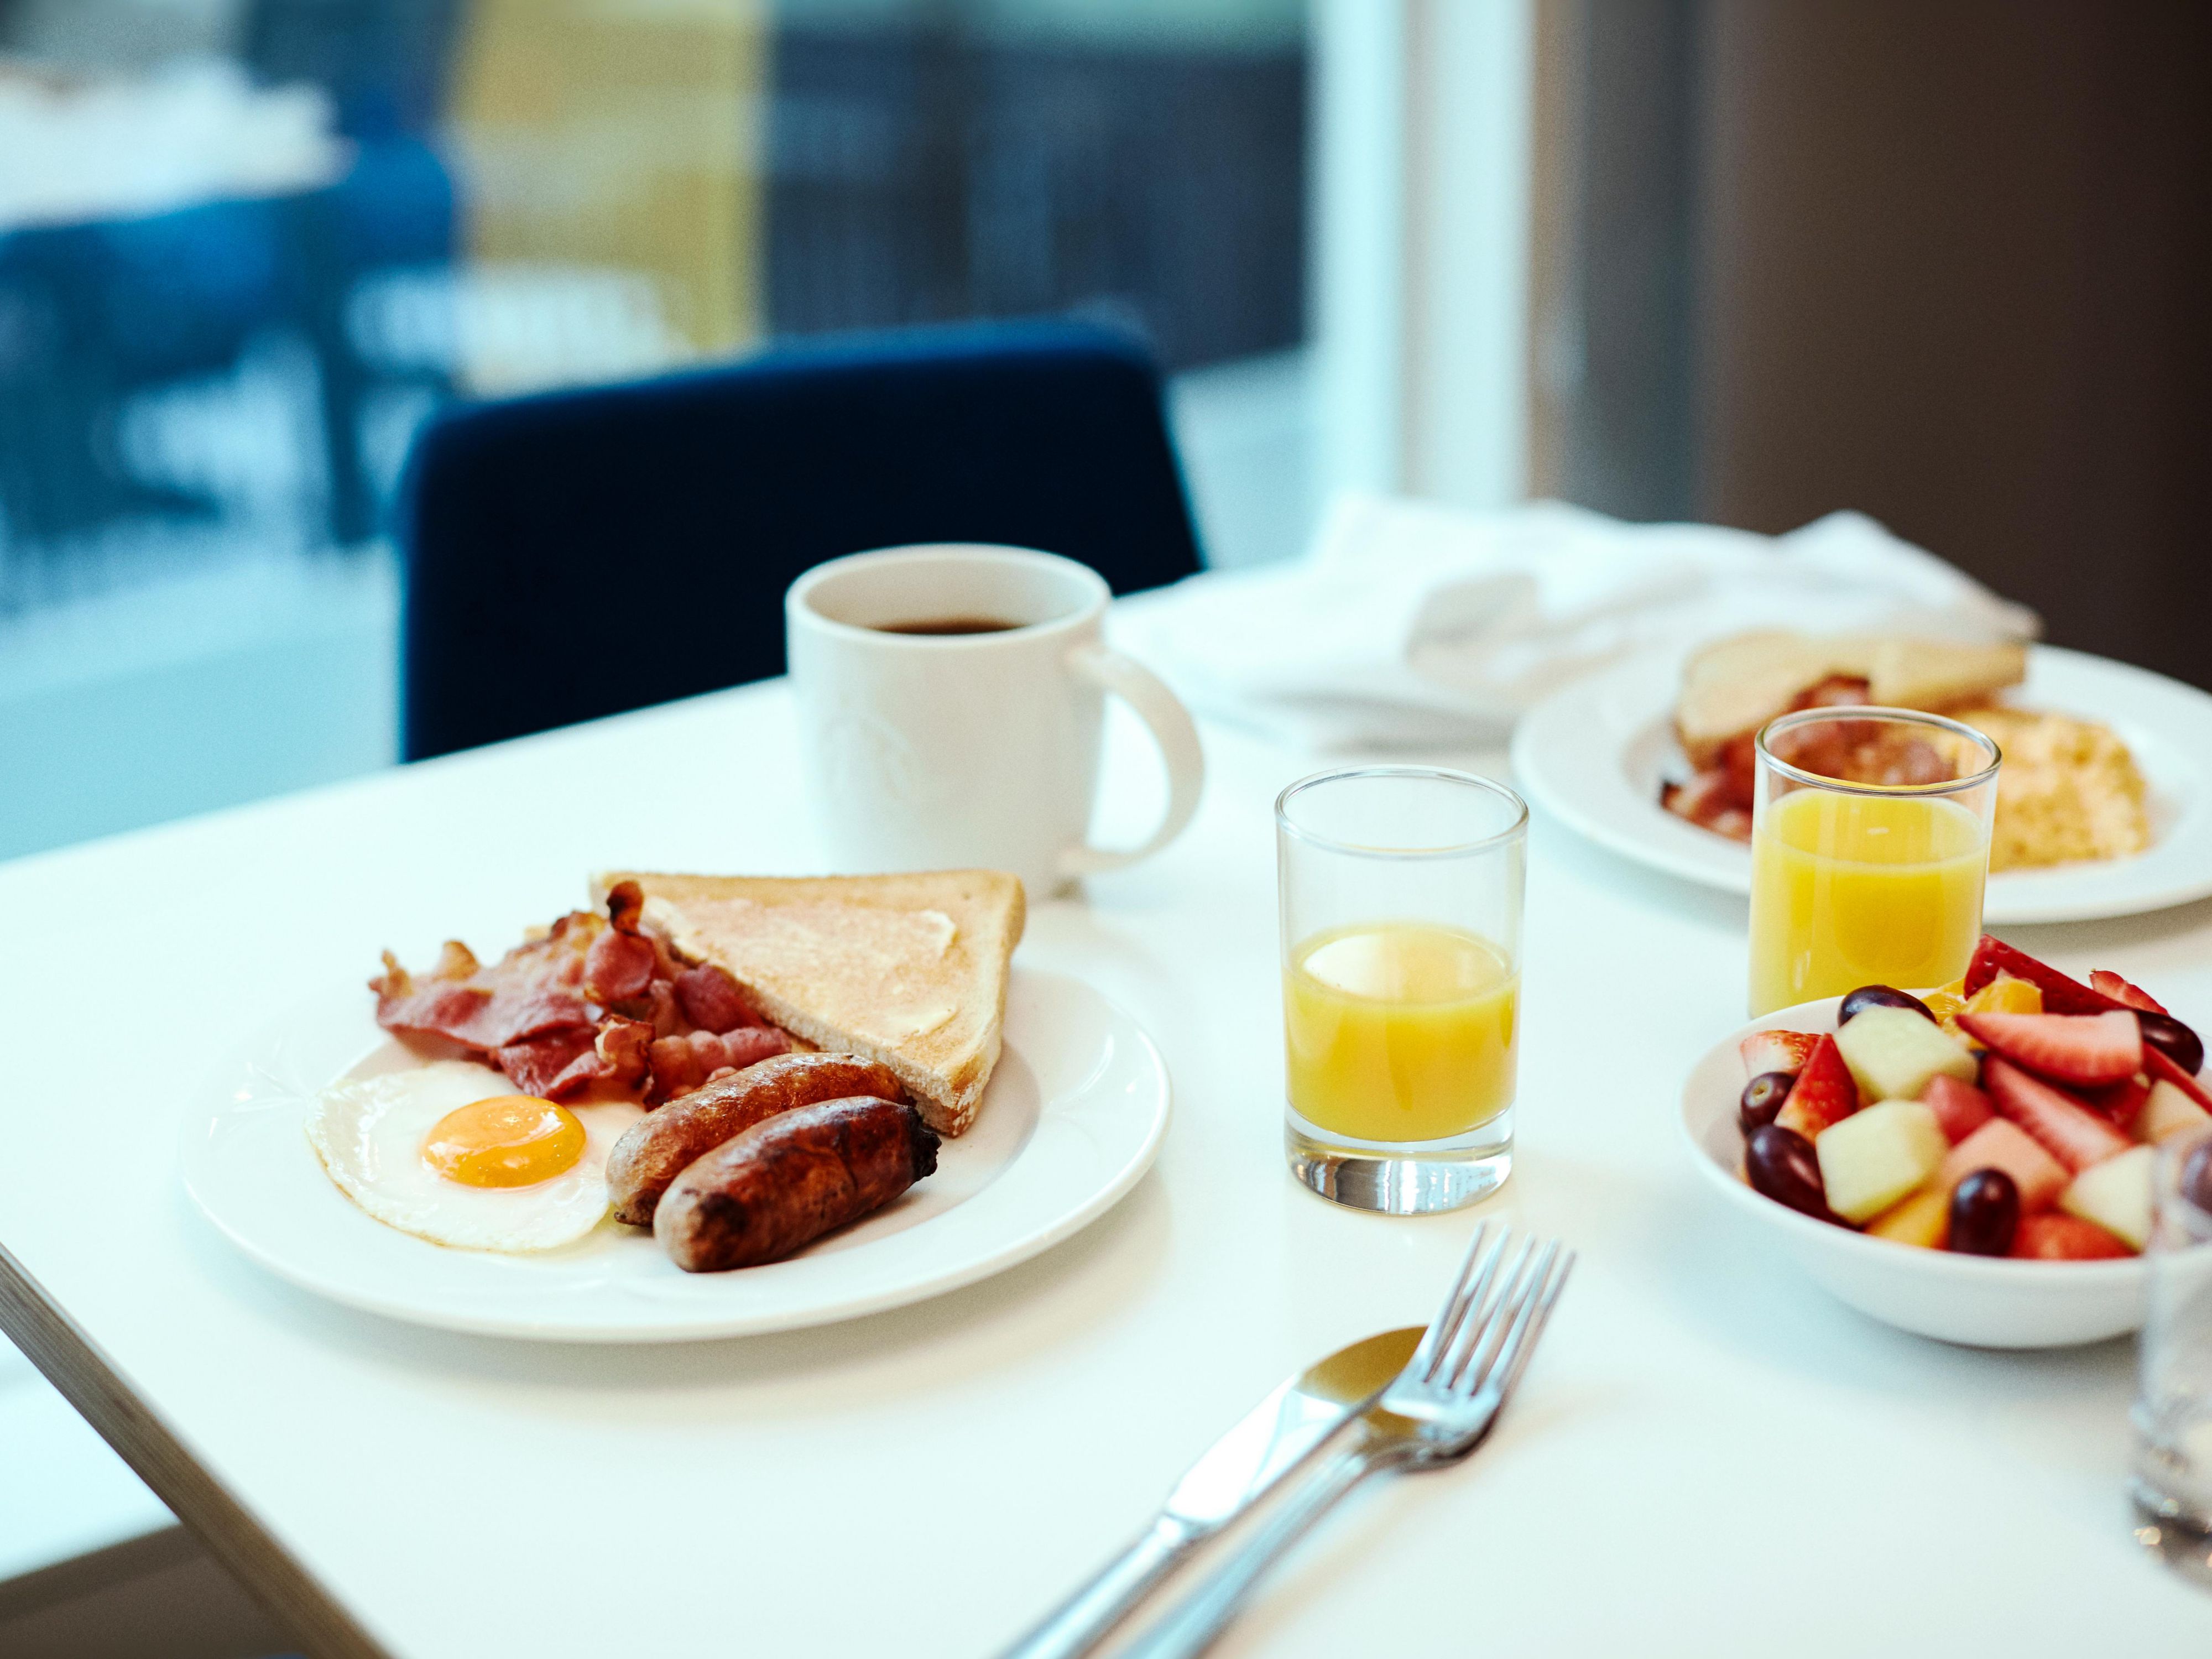 We Offer a Breakfast Package for 2